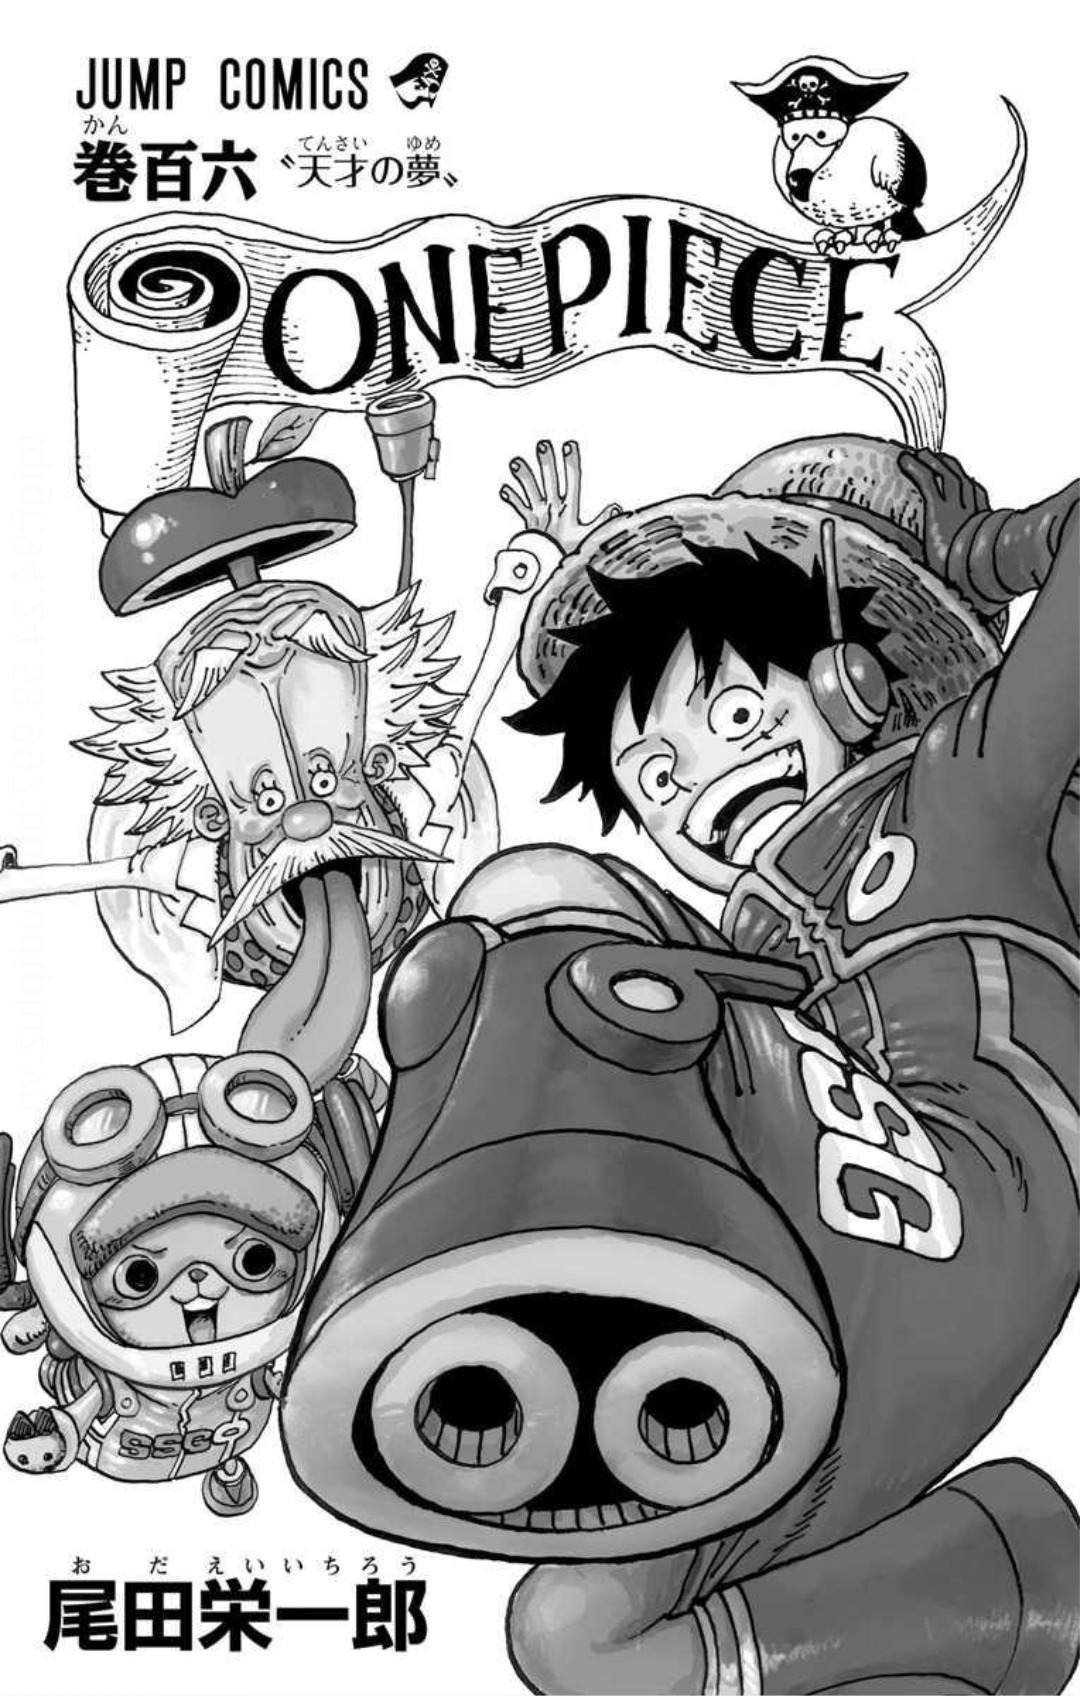 Cover Tome 106 soon 👀 #onepiece #tome106 #tone106onepiece